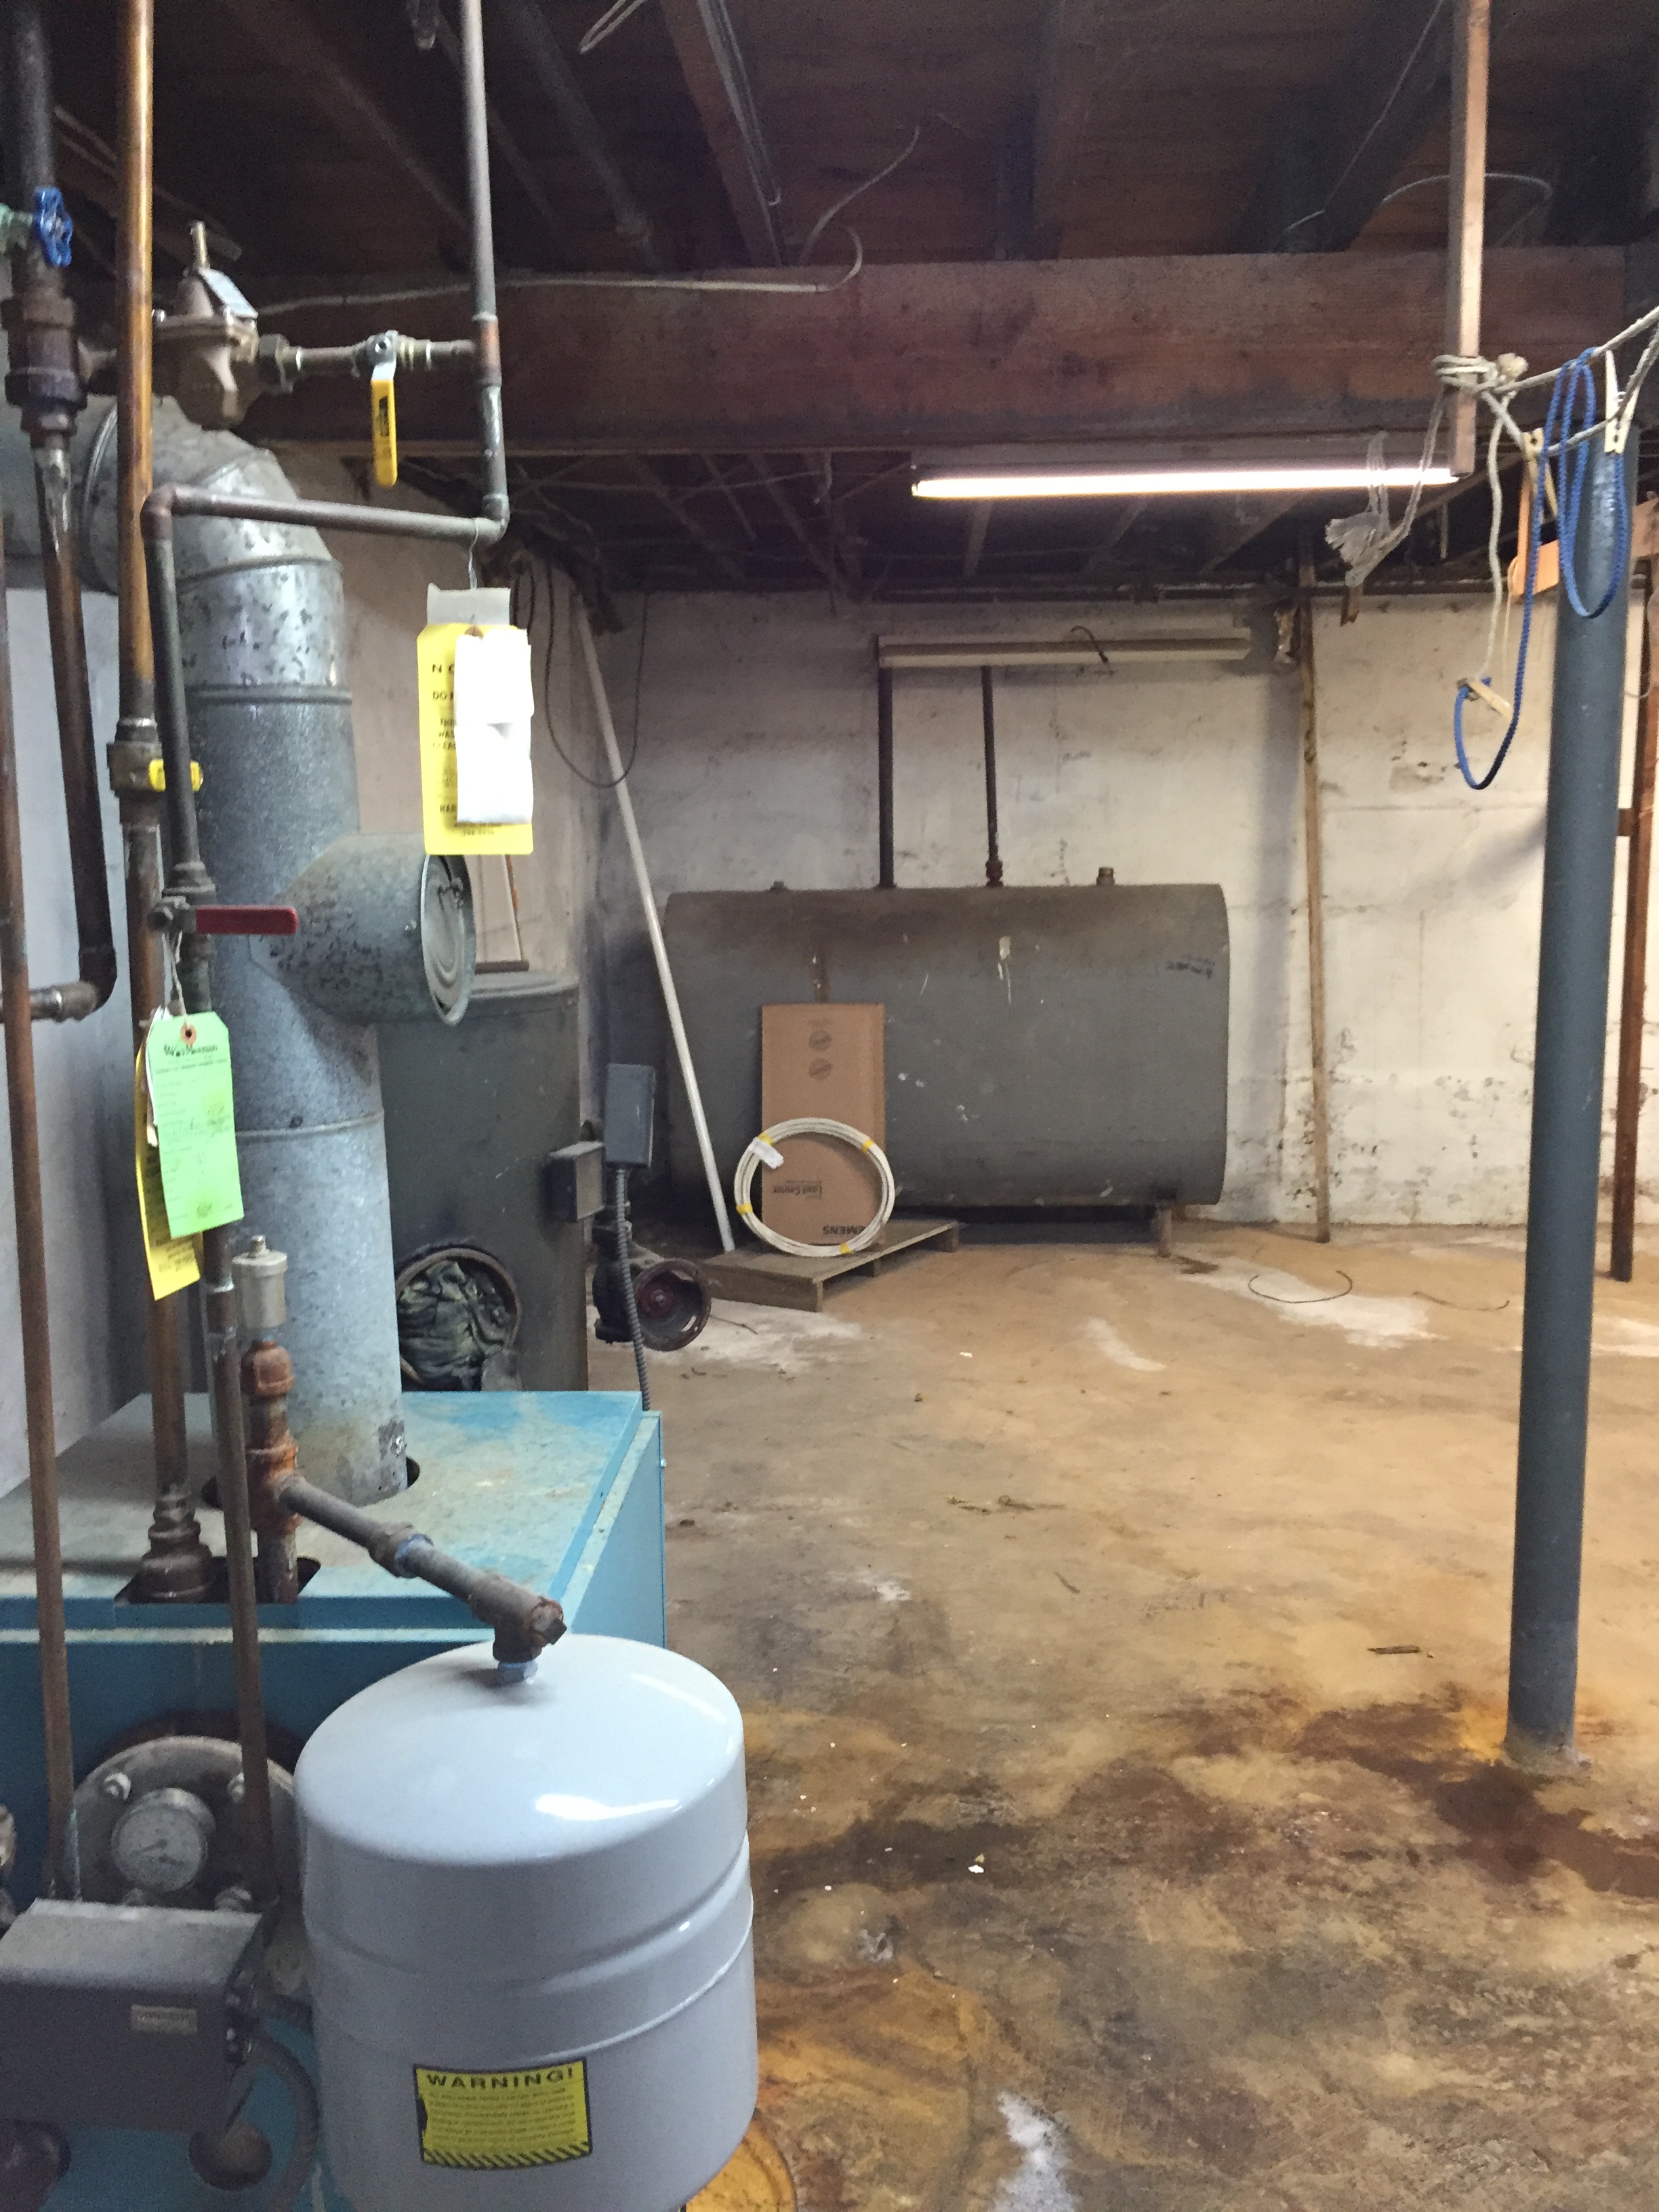 Basement water damage, let SERVPRO of Levittown service you in your time of need.